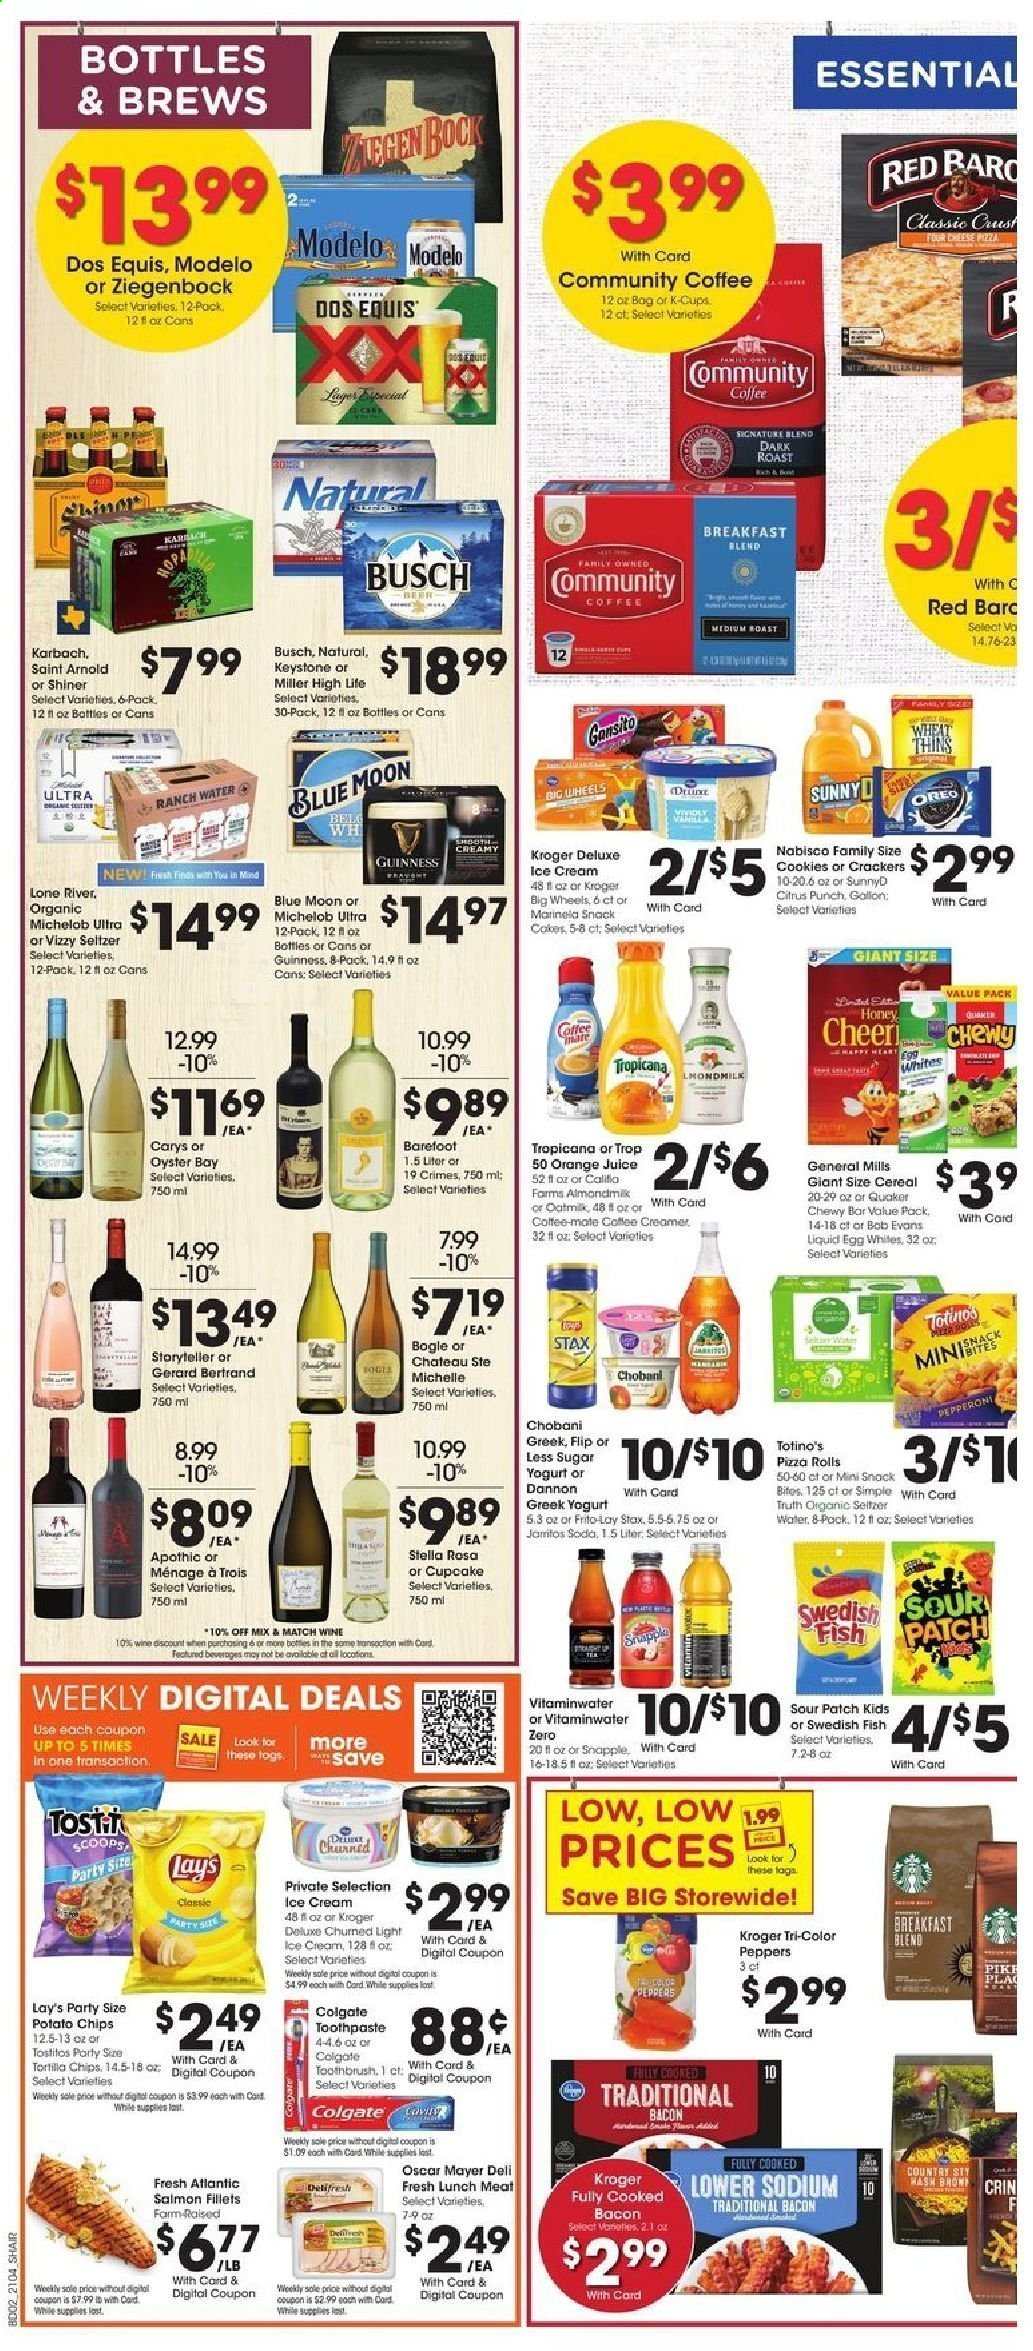 thumbnail - Kroger Flyer - 02/24/2021 - 03/02/2021 - Sales products - pizza rolls, cake, salmon, salmon fillet, northern pike, pizza, bacon, Oscar Mayer, lunch meat, greek yoghurt, Oreo, yoghurt, Chobani, Dannon, oat milk, creamer, ice cream, cookies, crackers, Sour Patch, potato chips, chips, snack, Lay’s, Tostitos, cereals, orange juice, soda, juice, Snapple, seltzer water, coffee, coffee capsules, L'Or, K-Cups, breakfast blend, wine, punch, beer, Dos Equis, Blue Moon, Michelob, Busch, Guinness, Miller, Keystone, Modelo, Colgate, toothbrush, toothpaste. Page 4.